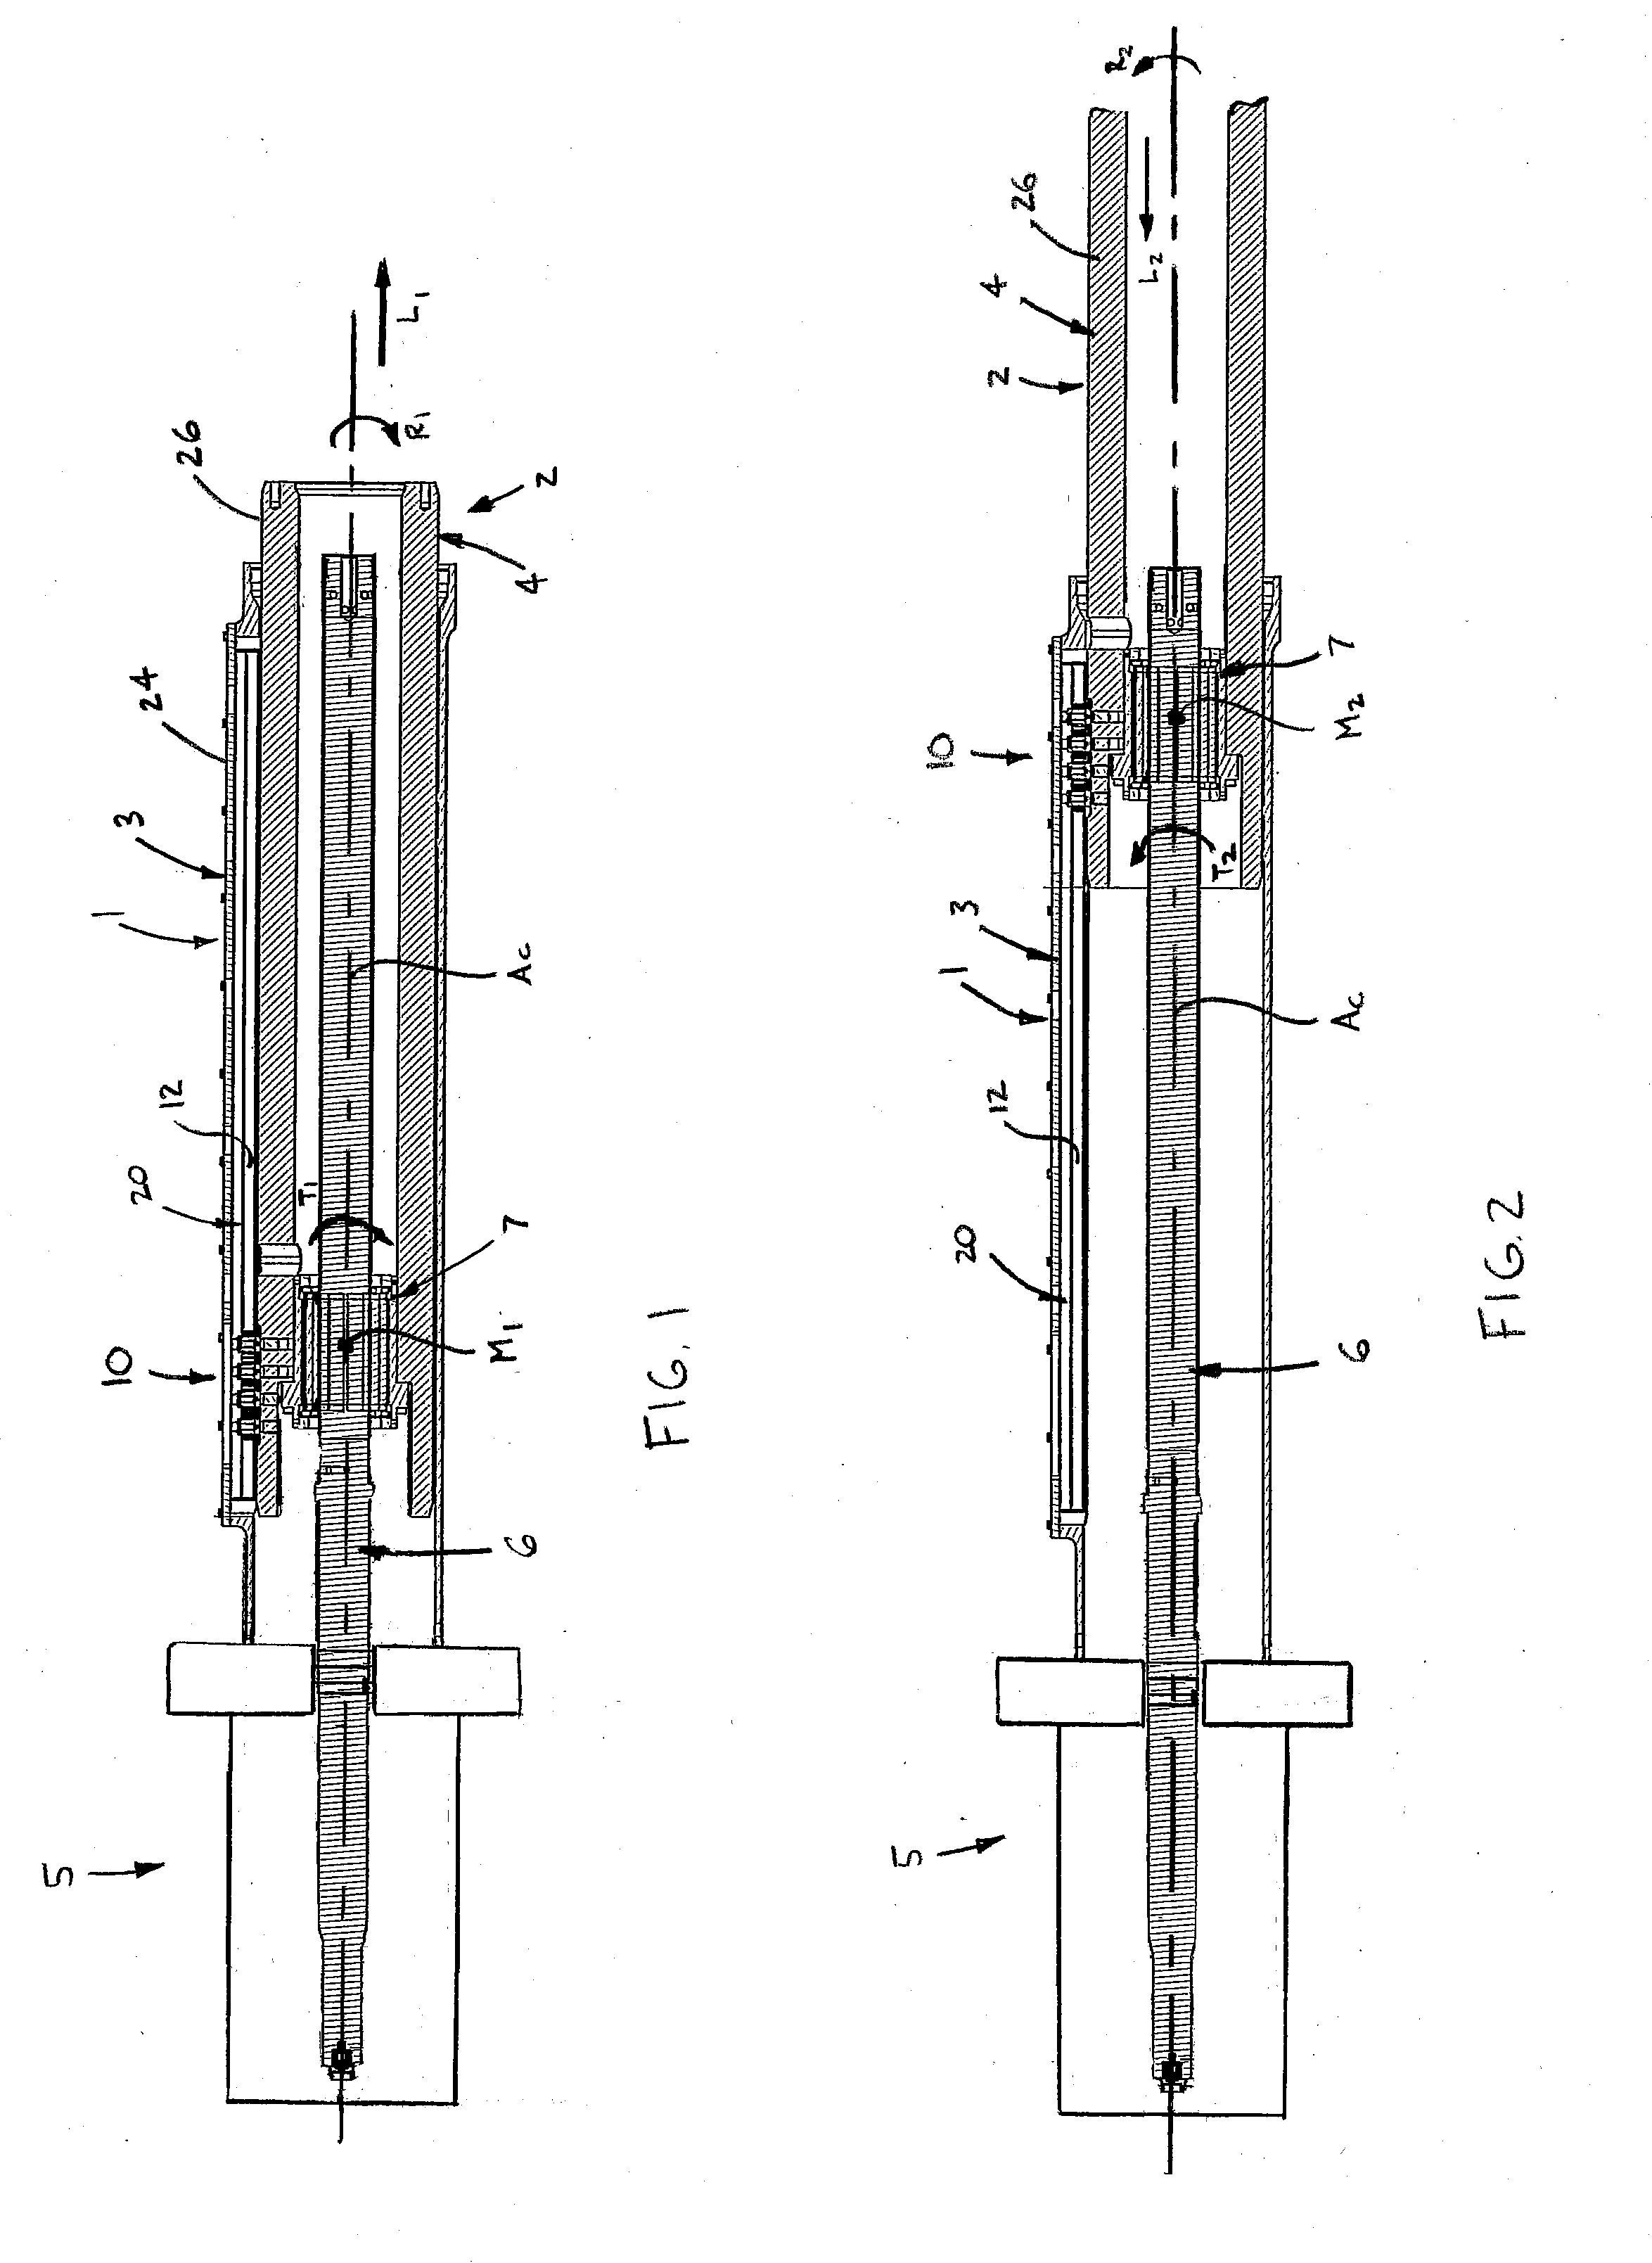 Anti-rotation device for actuators